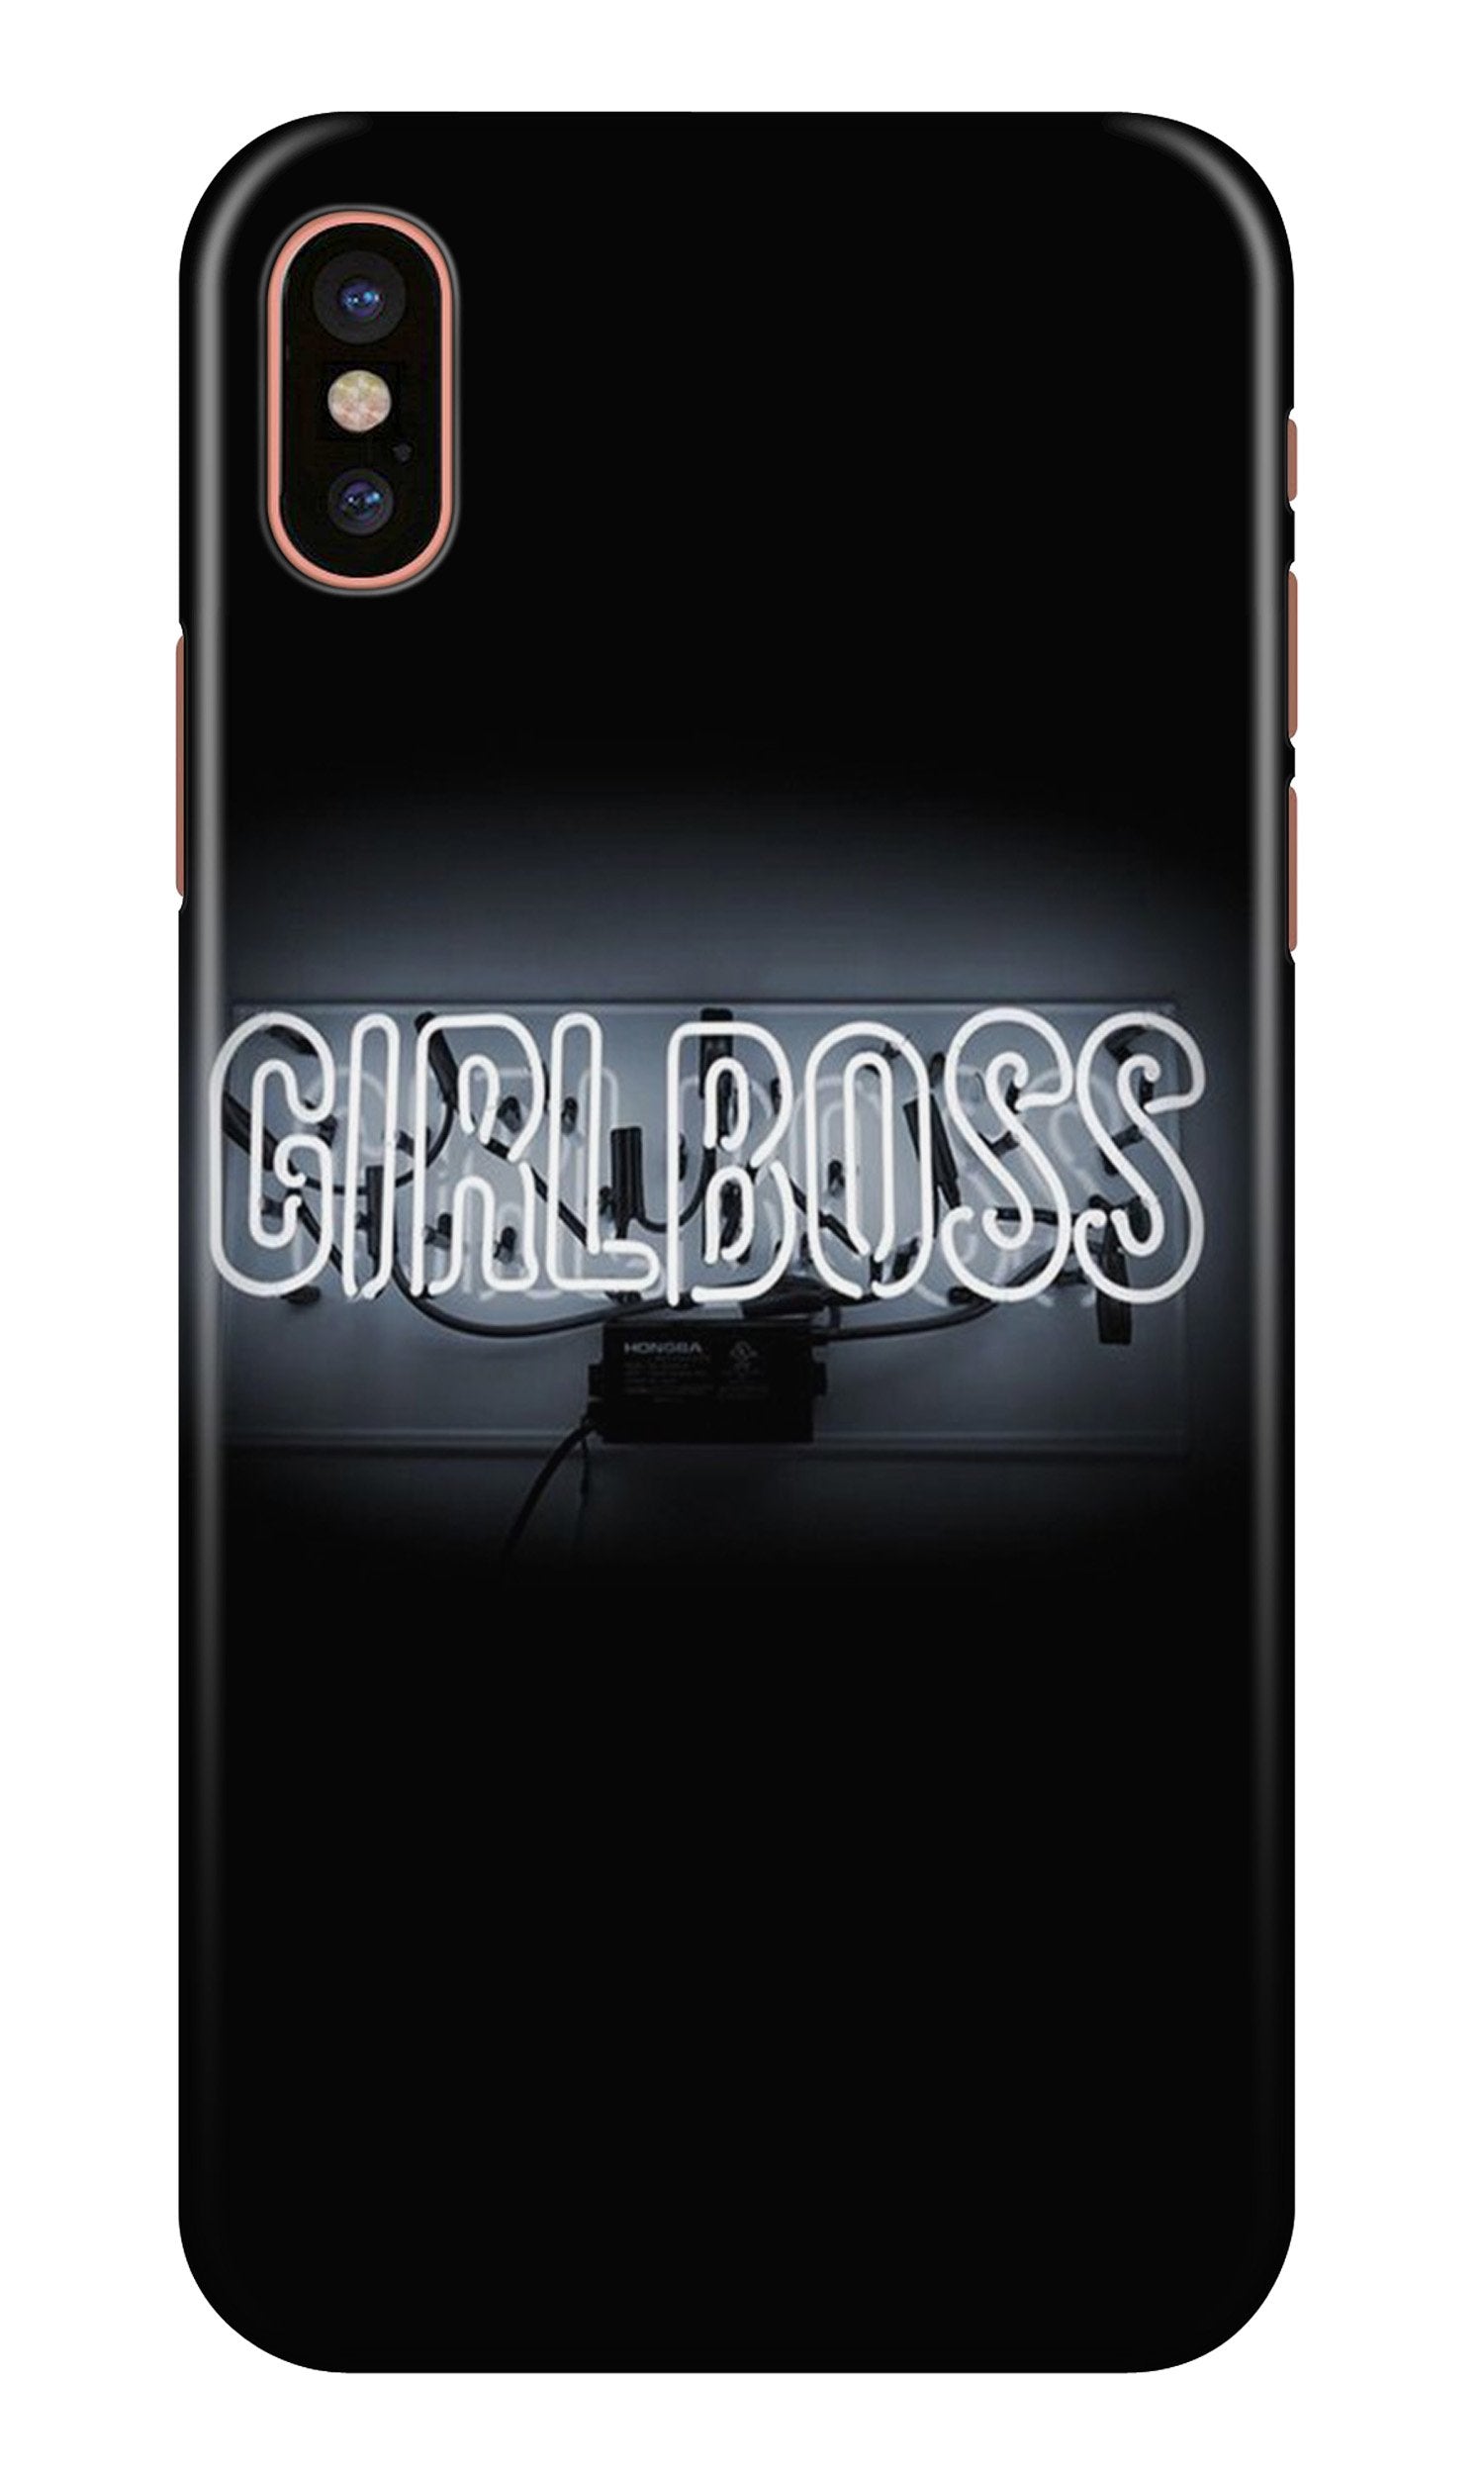 Girl Boss Black Case for iPhone X (Design No. 268)